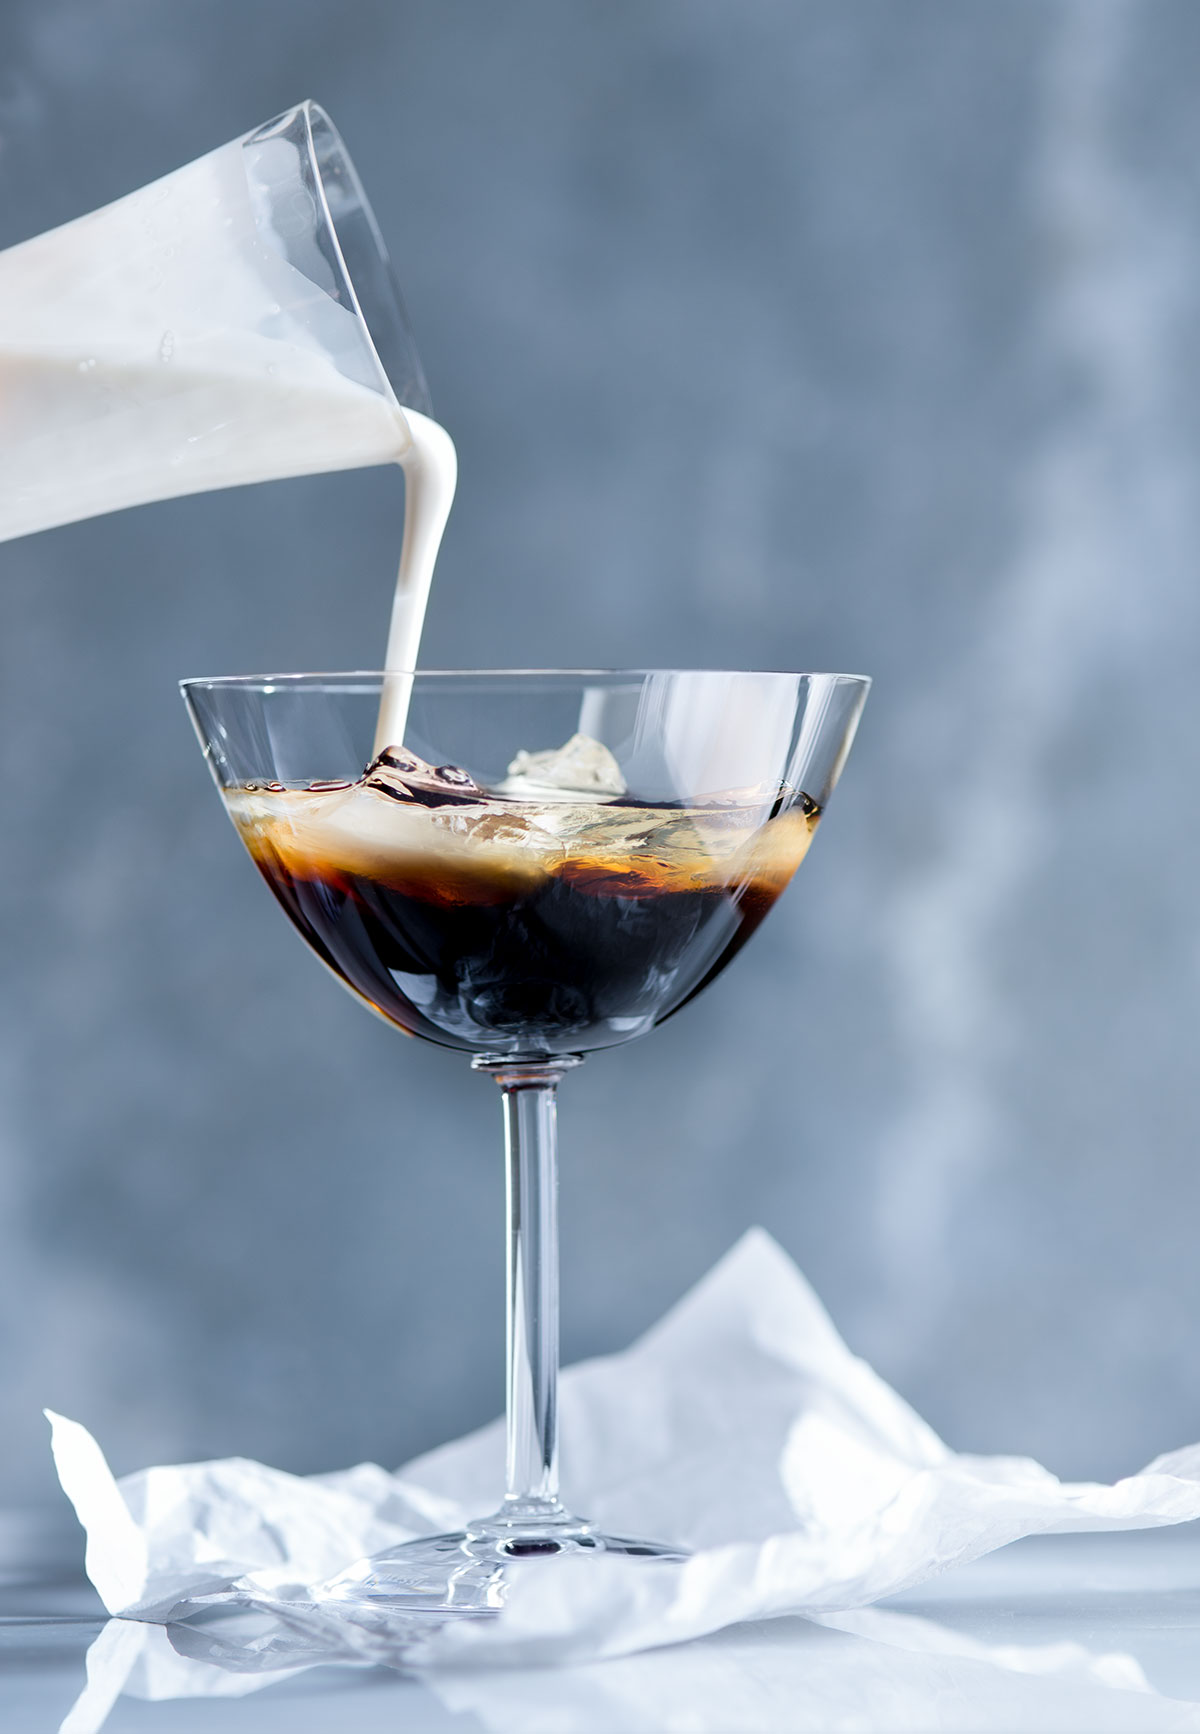 A chai white Russian cocktail being poured into a glass.